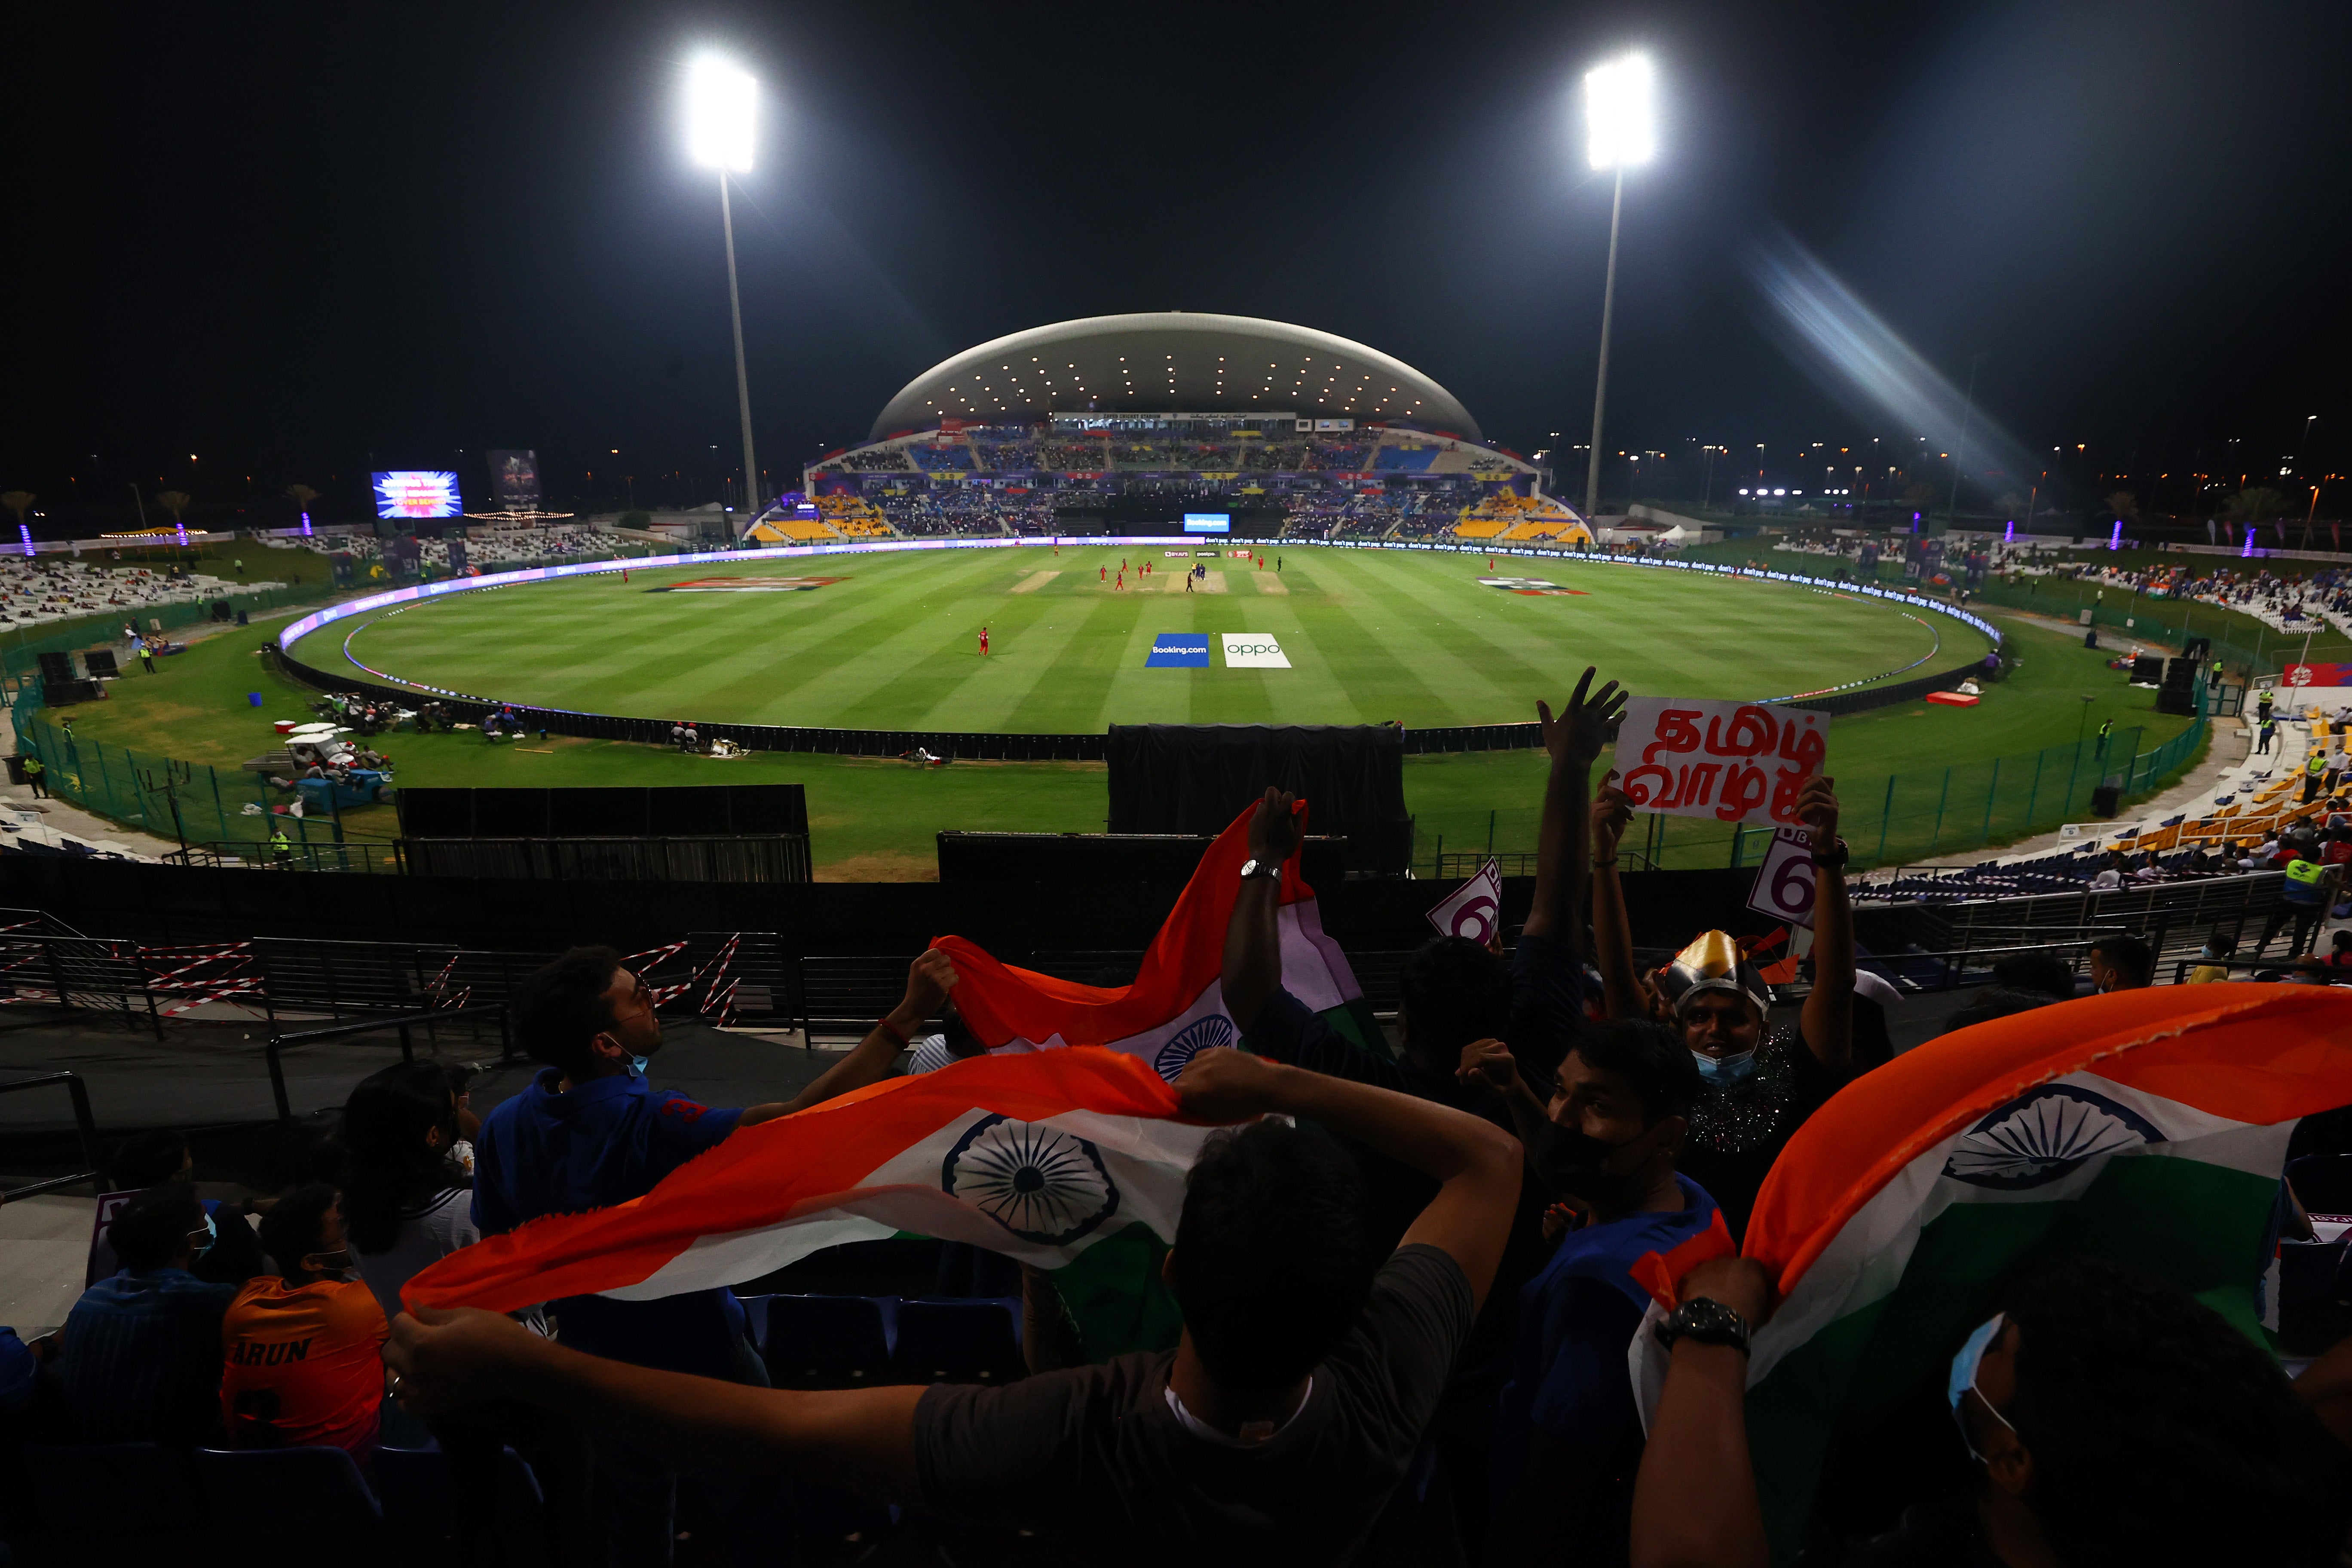 The T20 World Cup is being staged in the United Arab Emirates